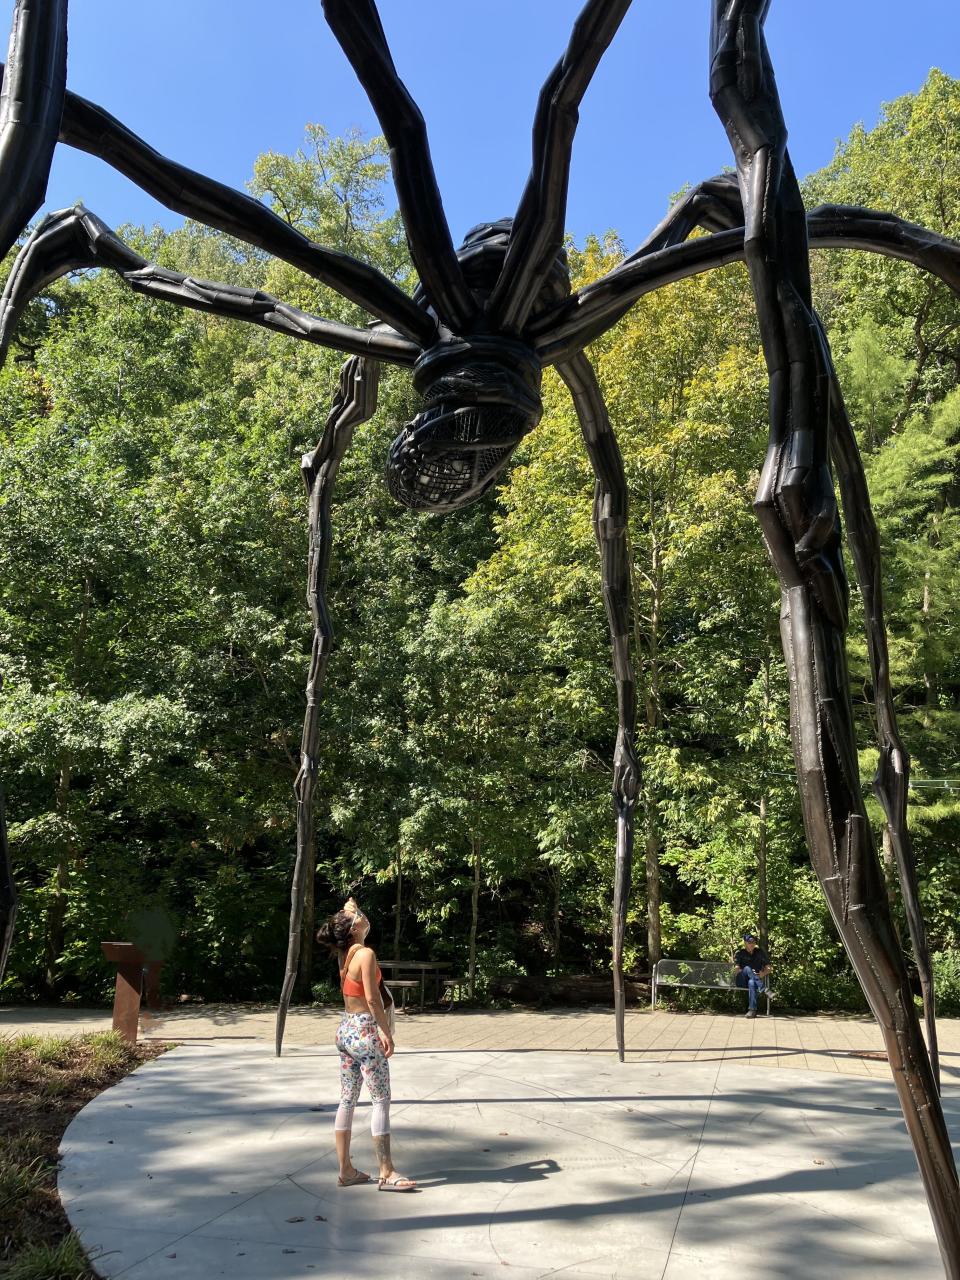 “Maman,” a 30-foot-tall sculpture by Louise Bourgeois, represents the protective, maternal instincts of spiders. The bronze, stainless steel and marble sculpture guards an entrance to the Crystal Bridges Museum of American Art in Bentonville, Ark.